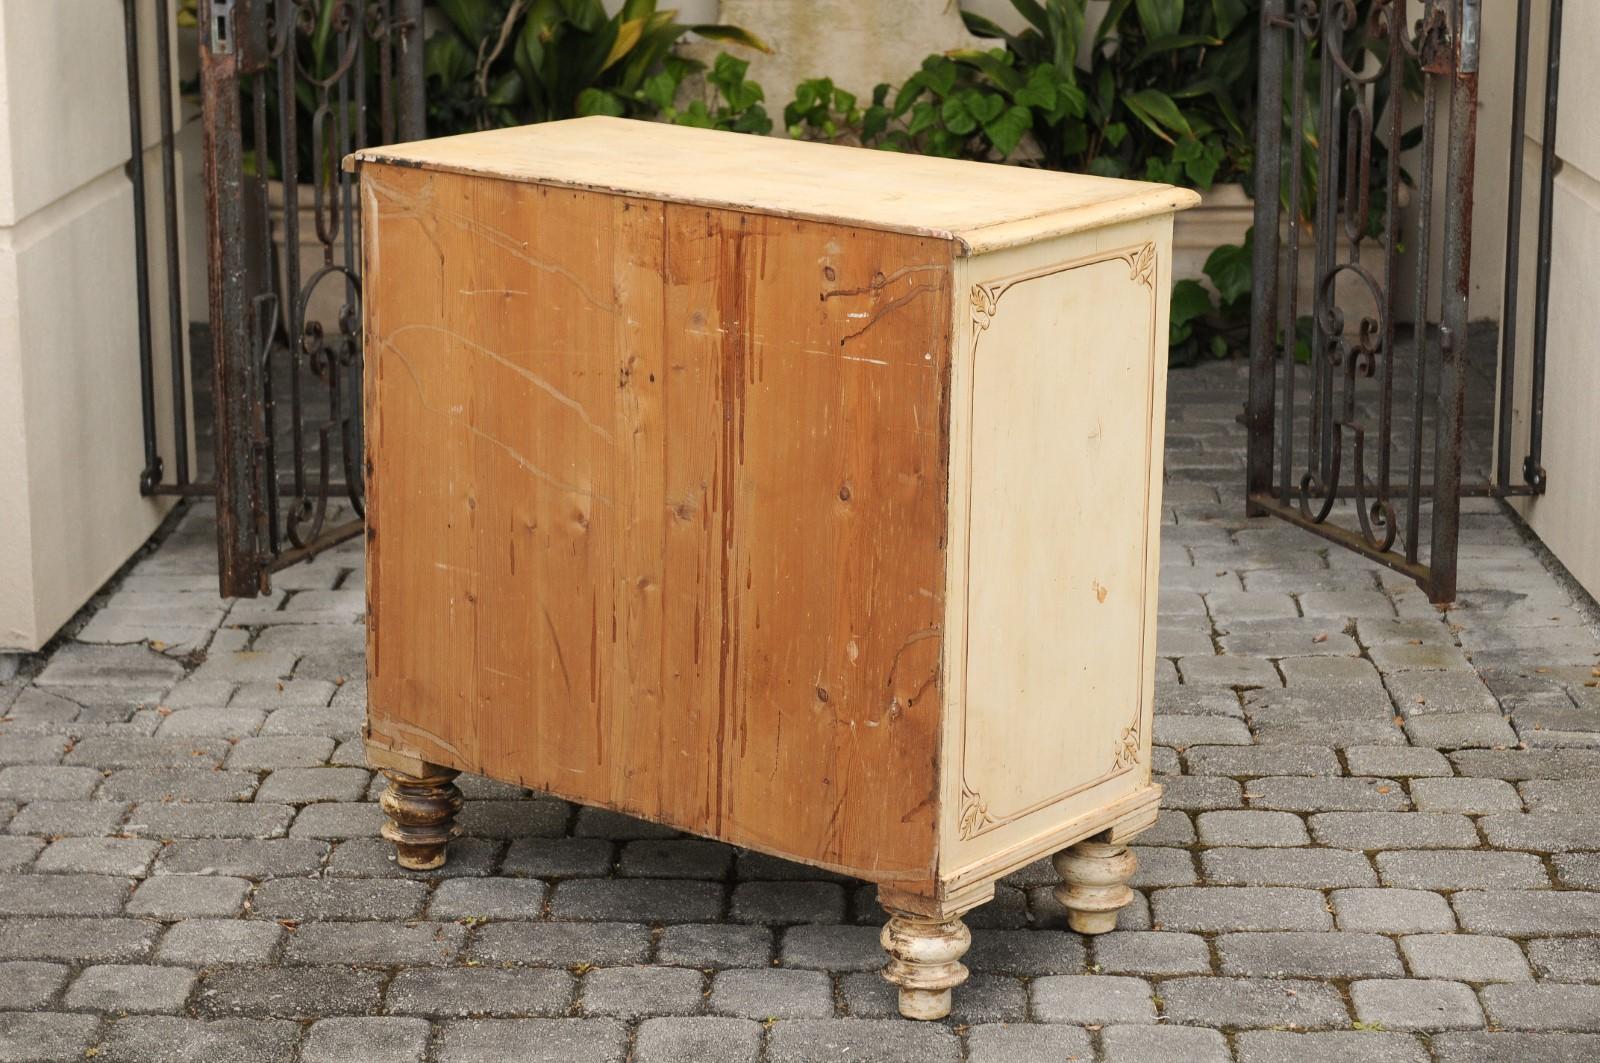 An English painted wood four-drawer commode from the late 19th century, with old paint, new scrollwork motifs and turnip feet. Born in England during the later years of the 19th century, this charming commode features a rectangular top with beveled